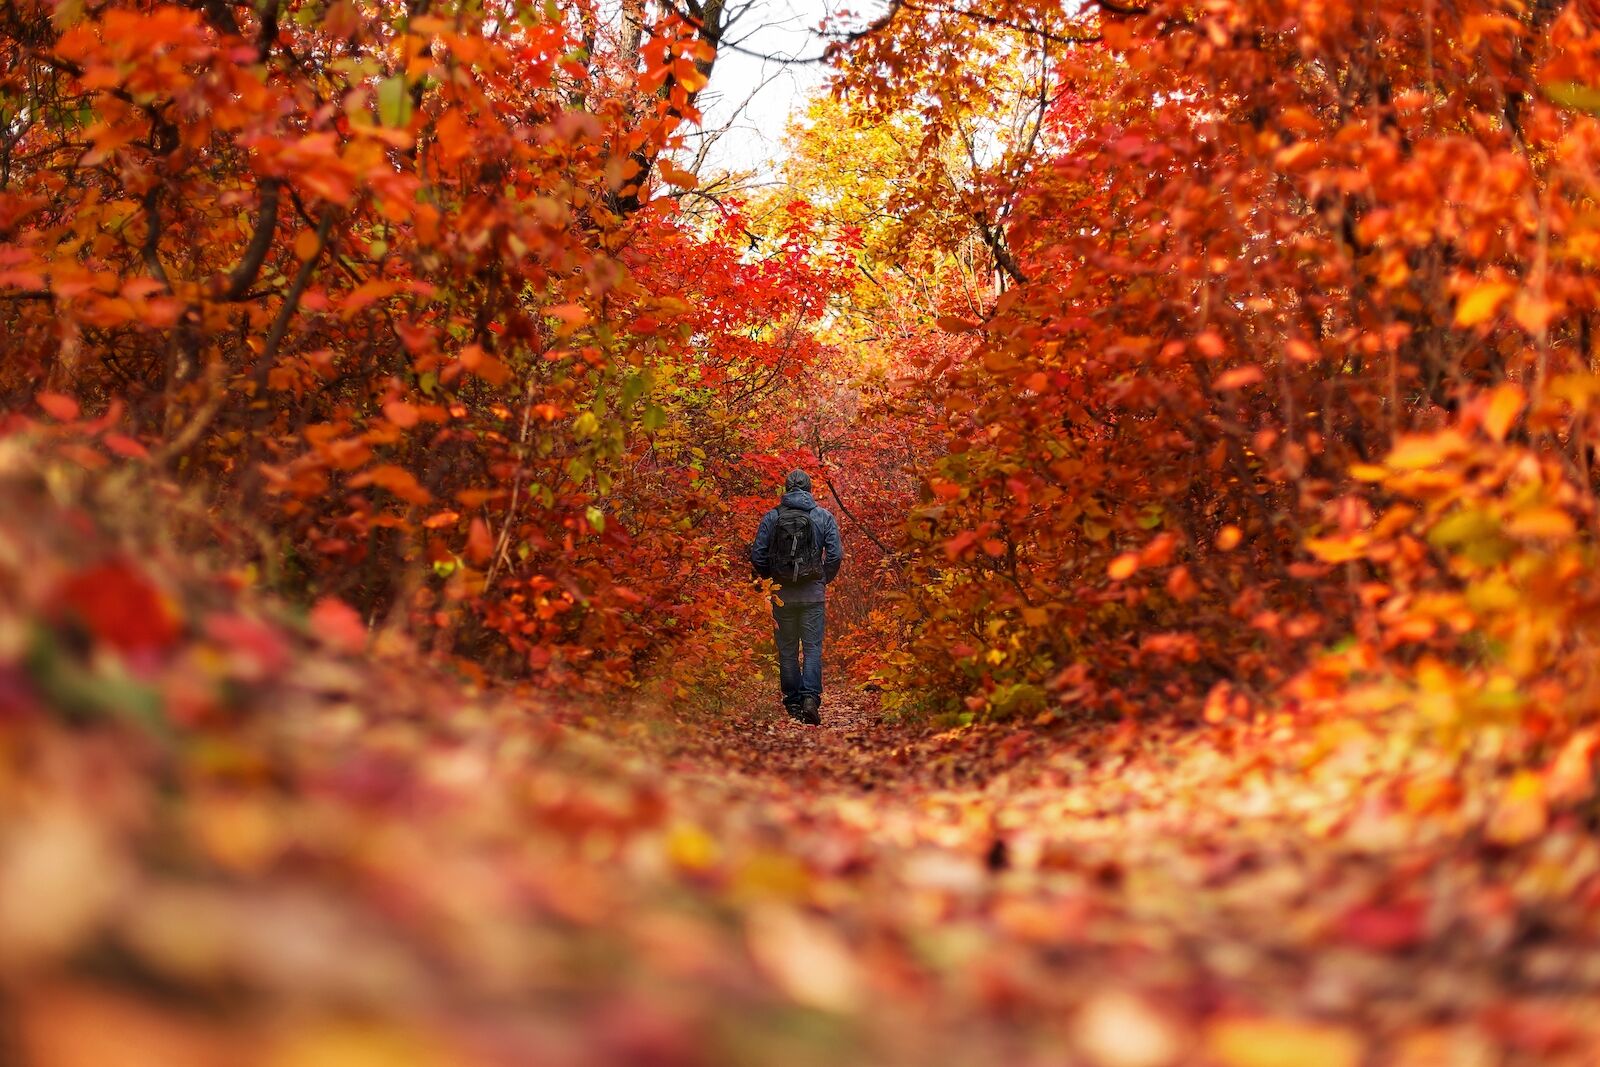 The guy walks through the autumn forest, a narrow path, yellow and red leaves.